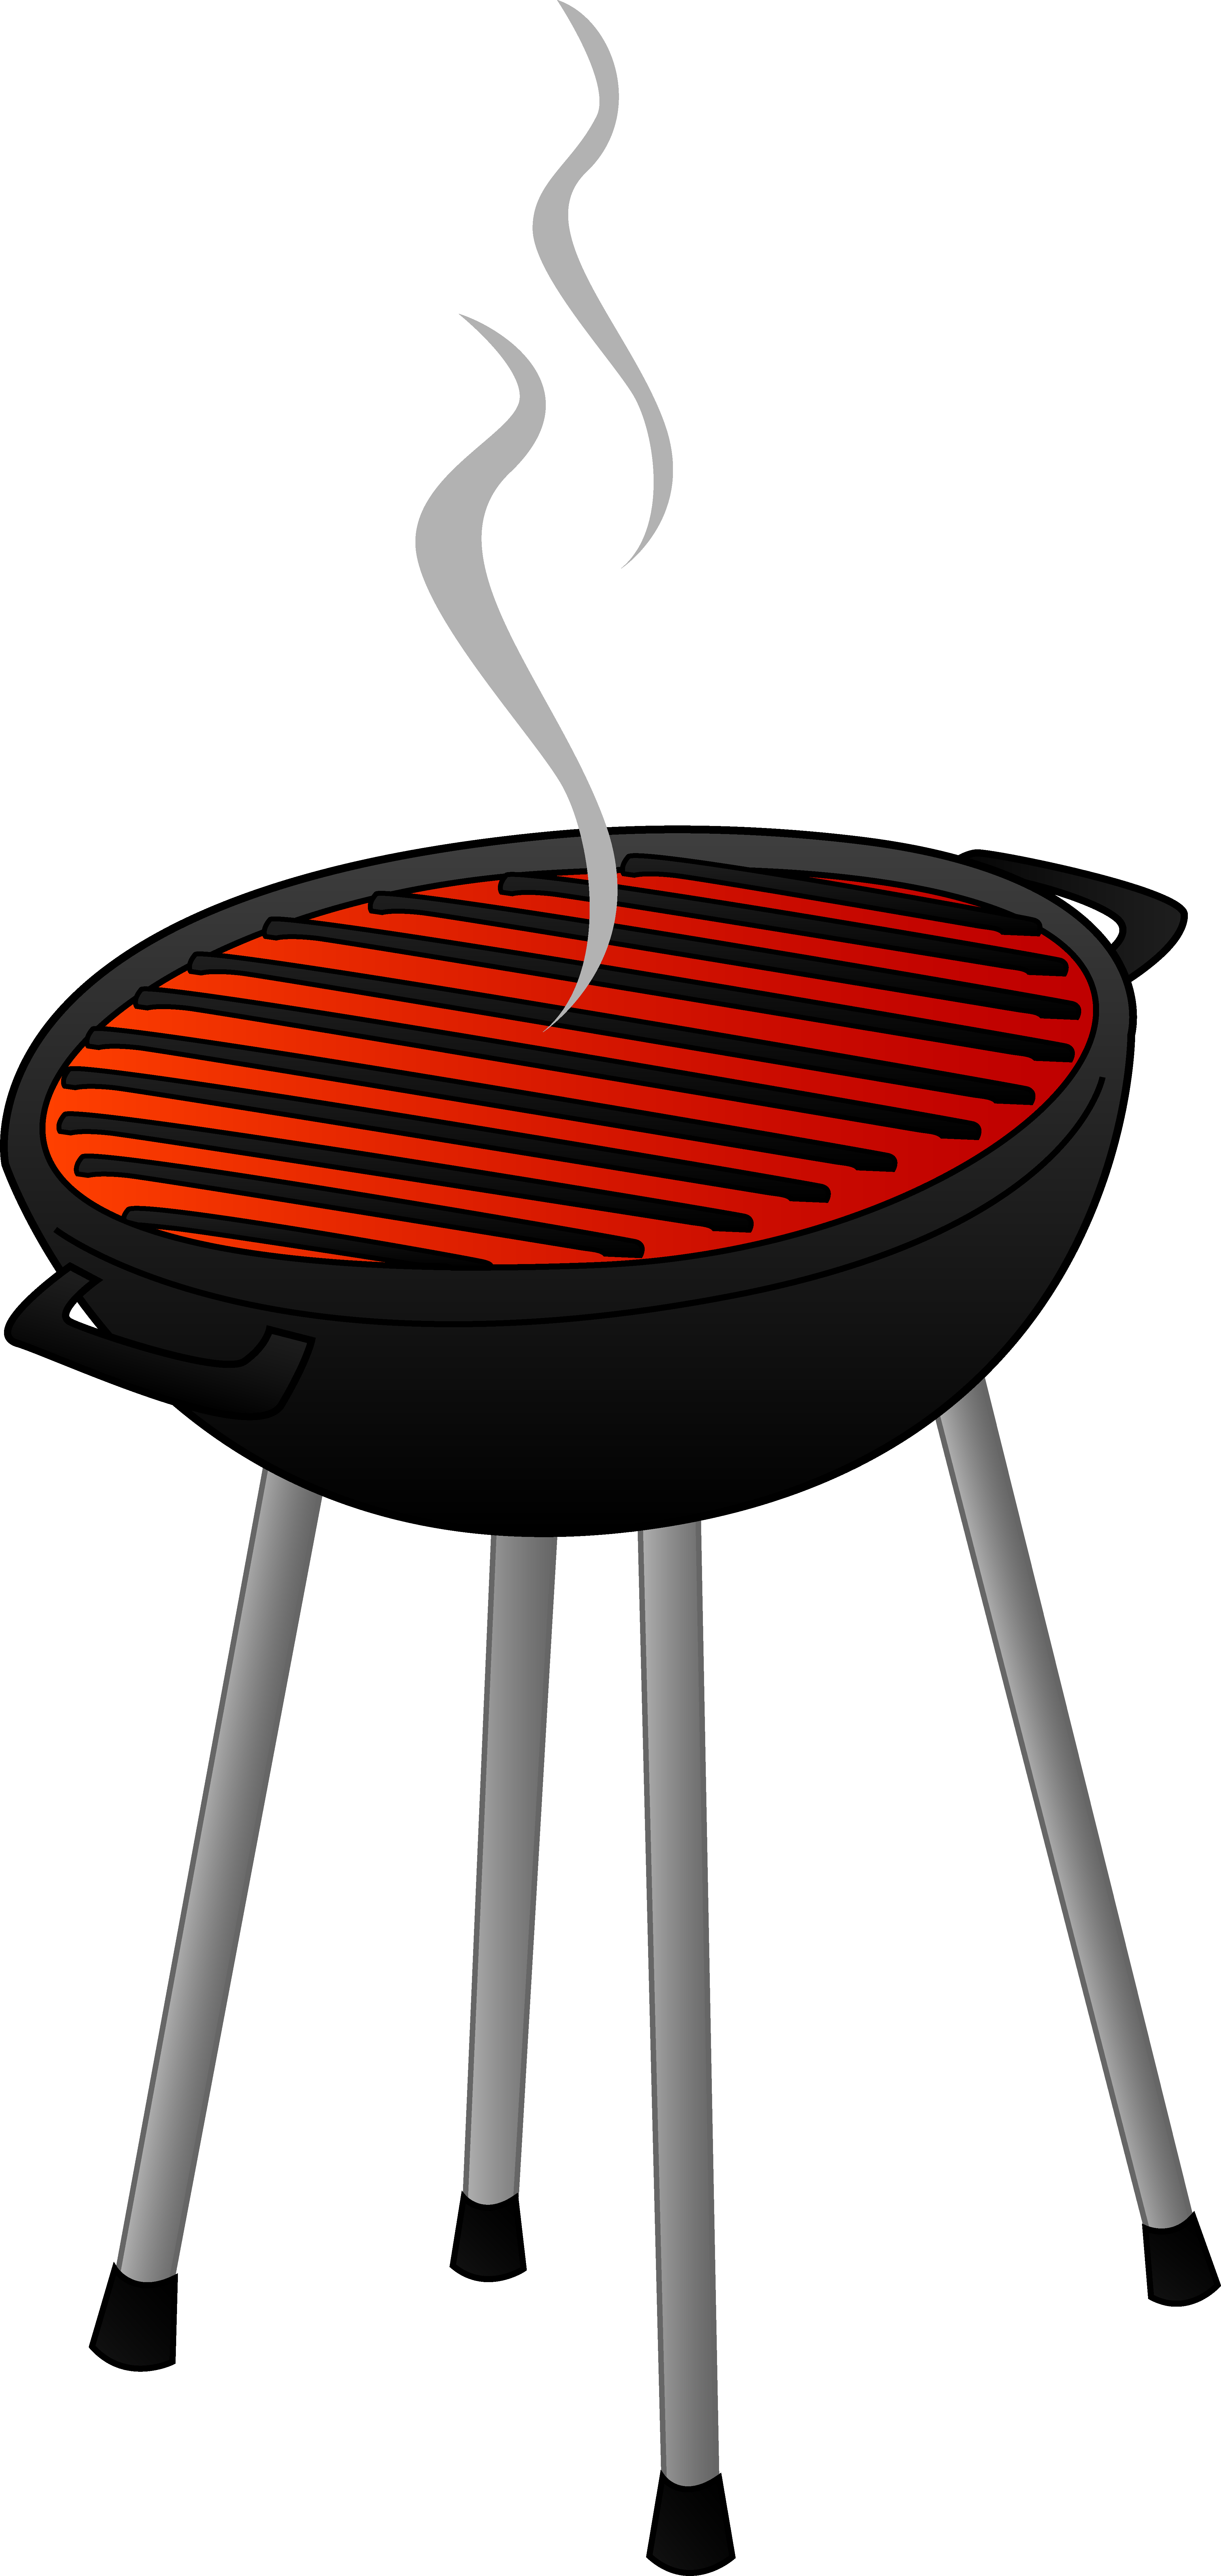 Bbq clipart border free clipart images 2